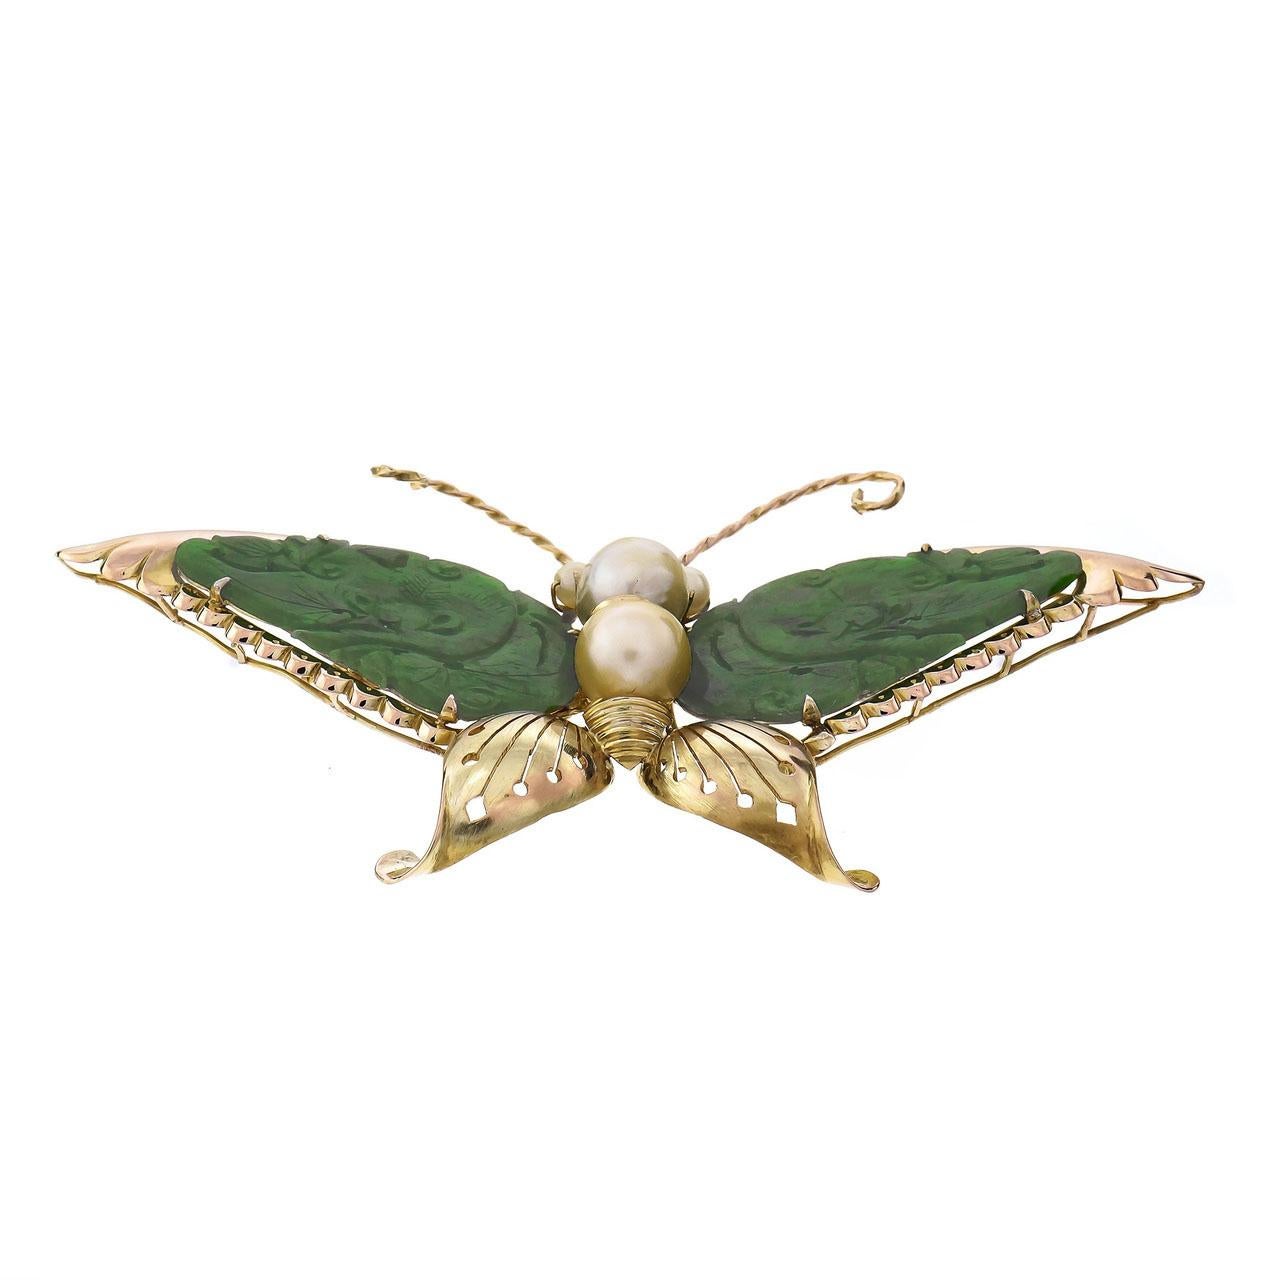 Vintage 1940's handmade Jade and Pearl Butterfly brooch. 14k yellow and rose gold with cultured Pearl accents and hand carved bright green Omphacite Jade wings. GIA certified. 

2 pierced carved Omphacite Jade, 34.13 x 20.26mm, GIA certificate